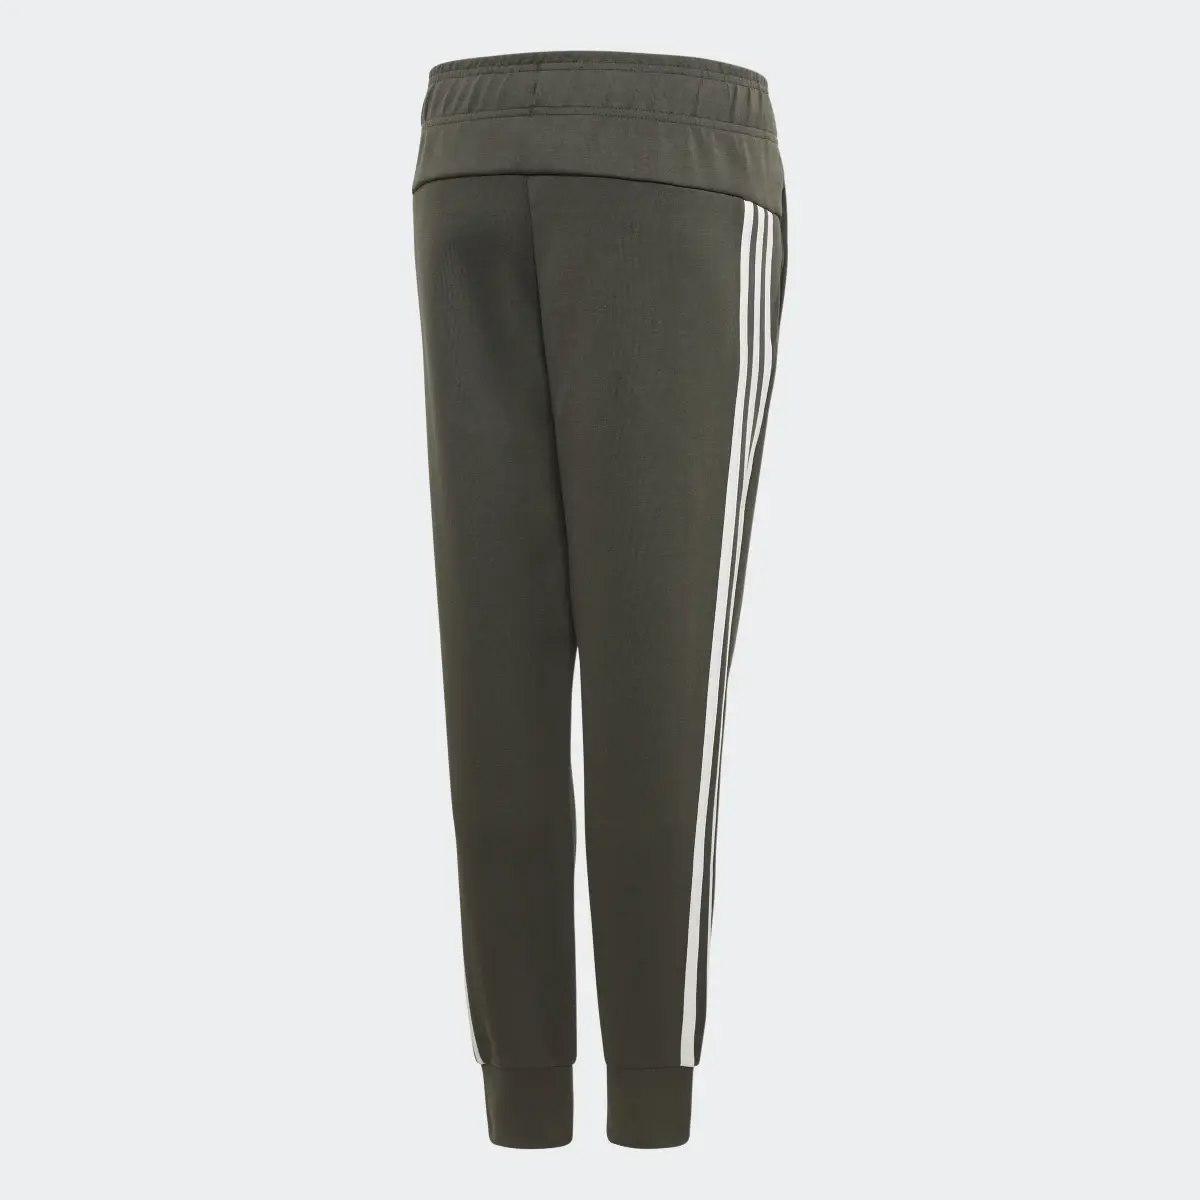 Adidas Must Haves 3-Stripes Tracksuit Bottoms. 2